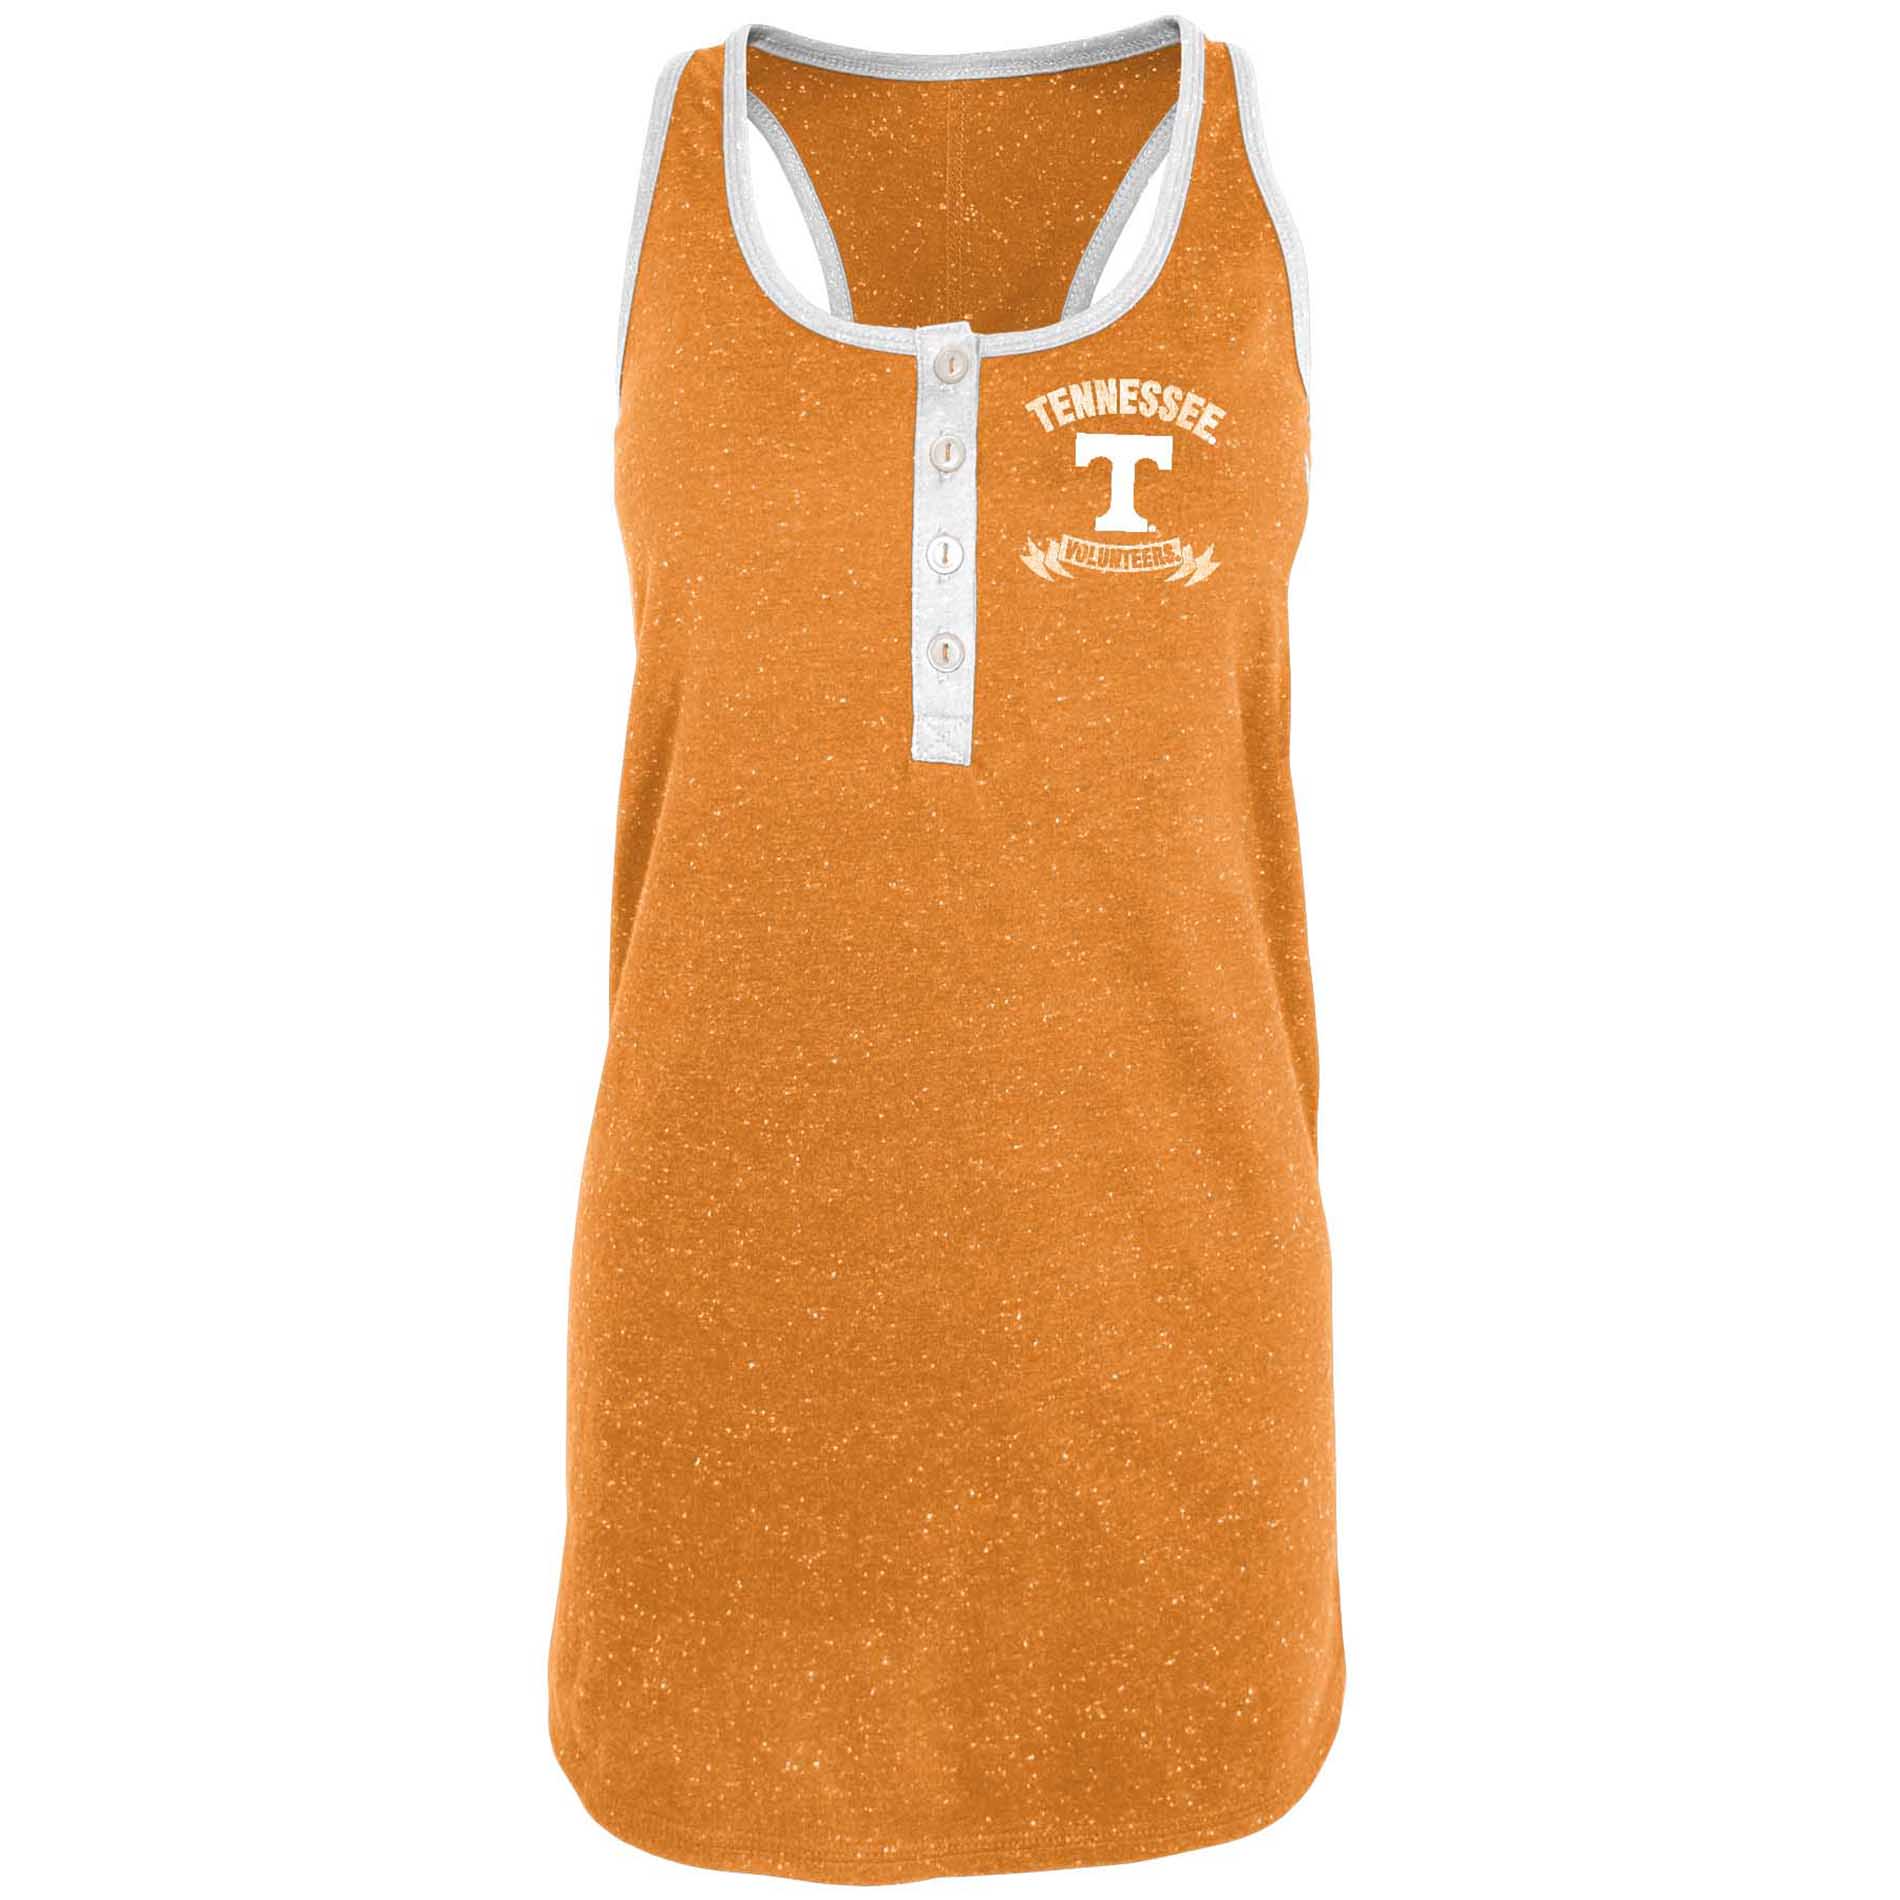 NCAA Women's University of Tennessee Volunteers and Lady Vols[A 31] Racerback Tank